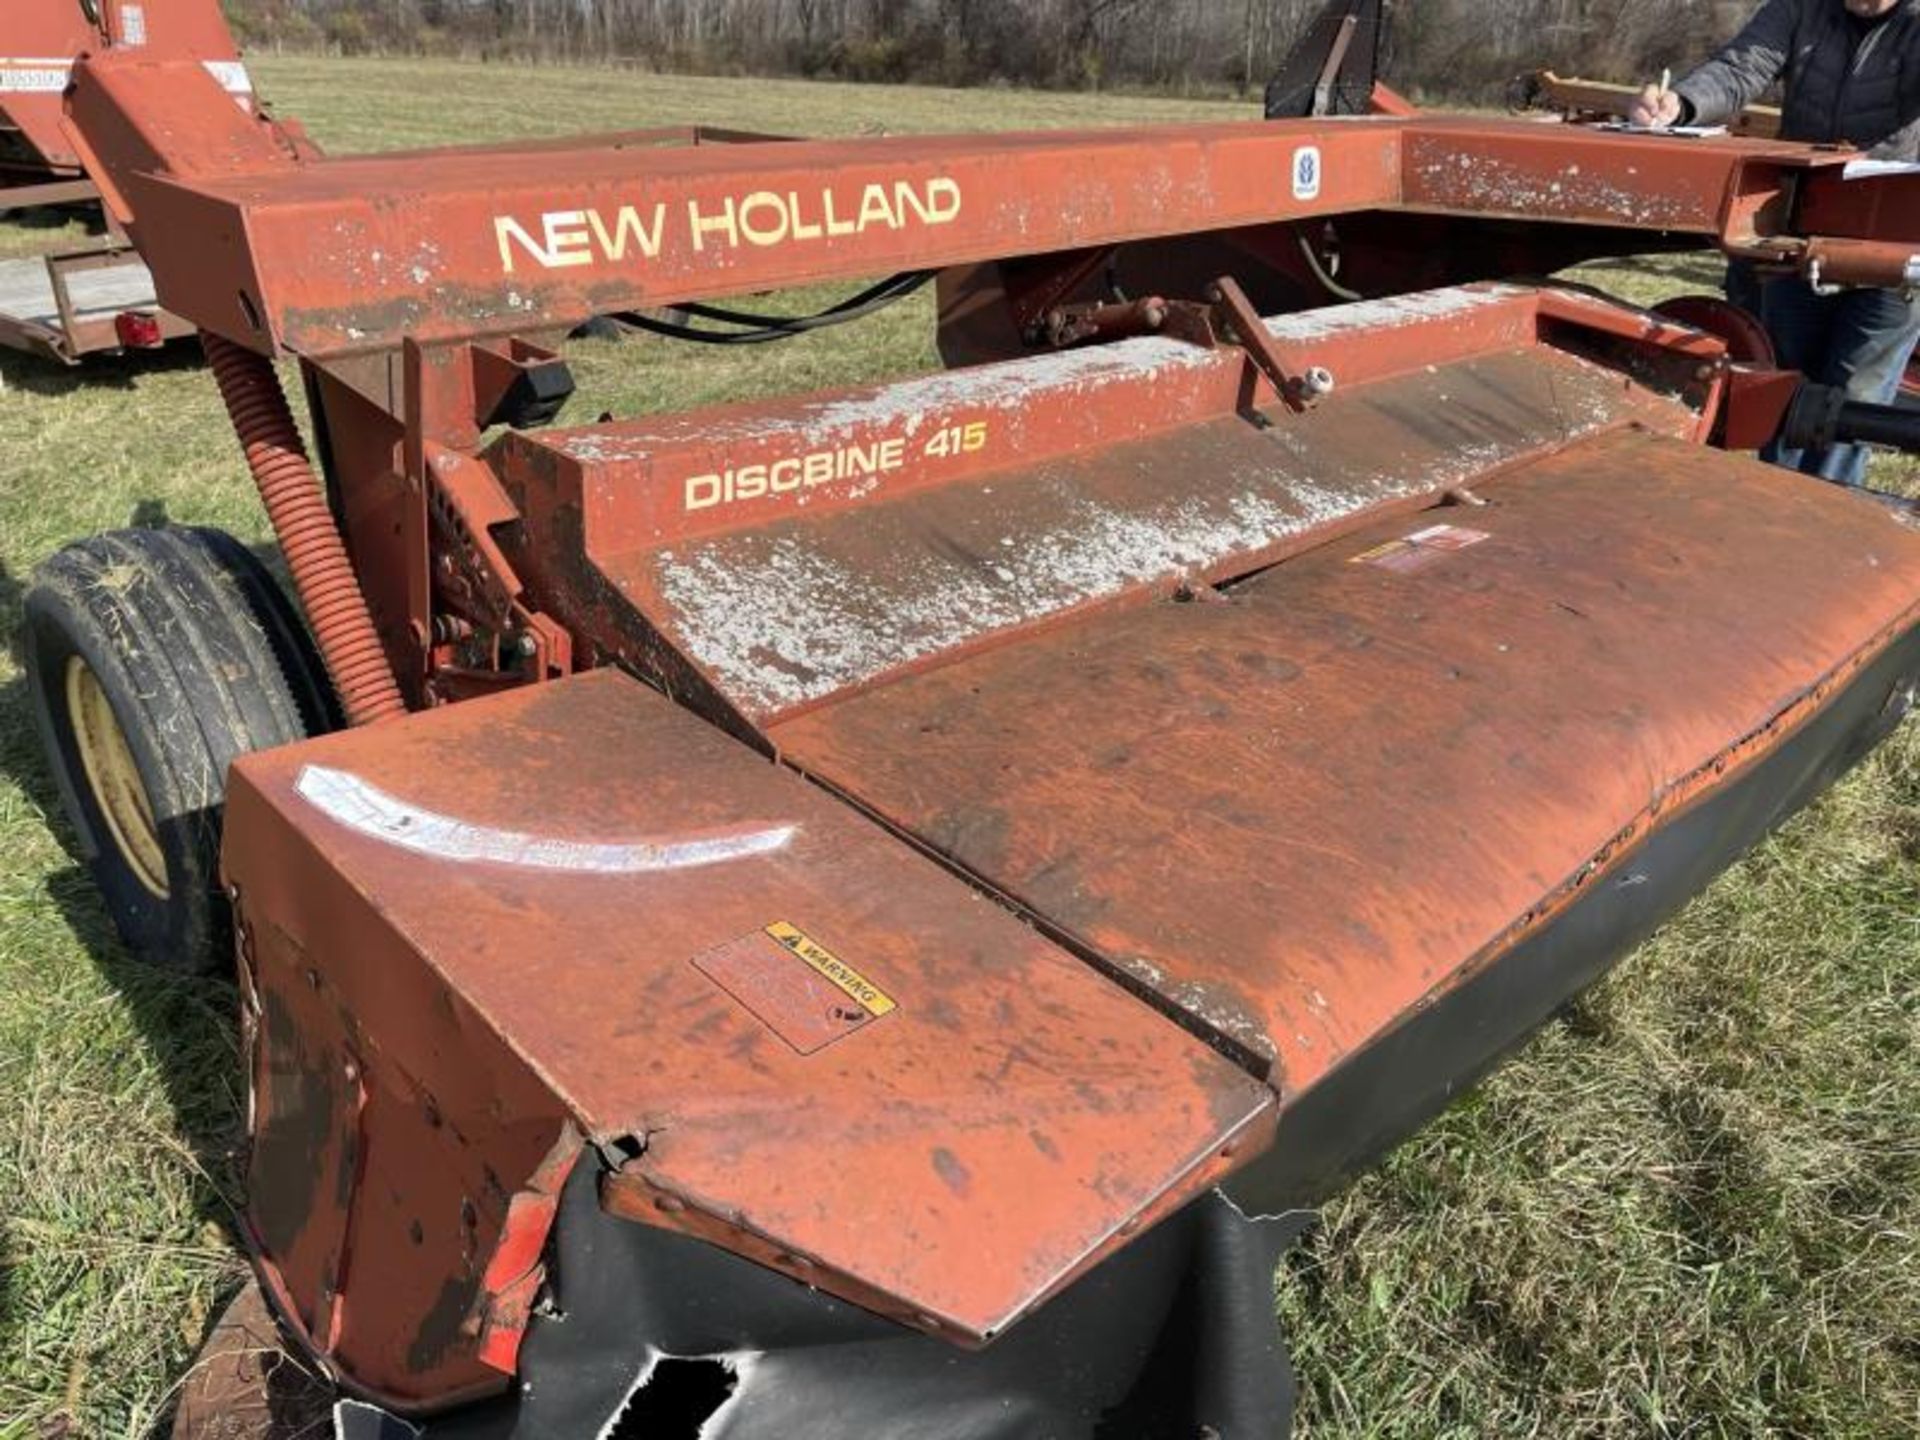 New Holland Discbine 415 Mower, Blown Hydraulic Hose, Gearbox Problem, SN: 891648Hose, Gearbox - Image 4 of 13